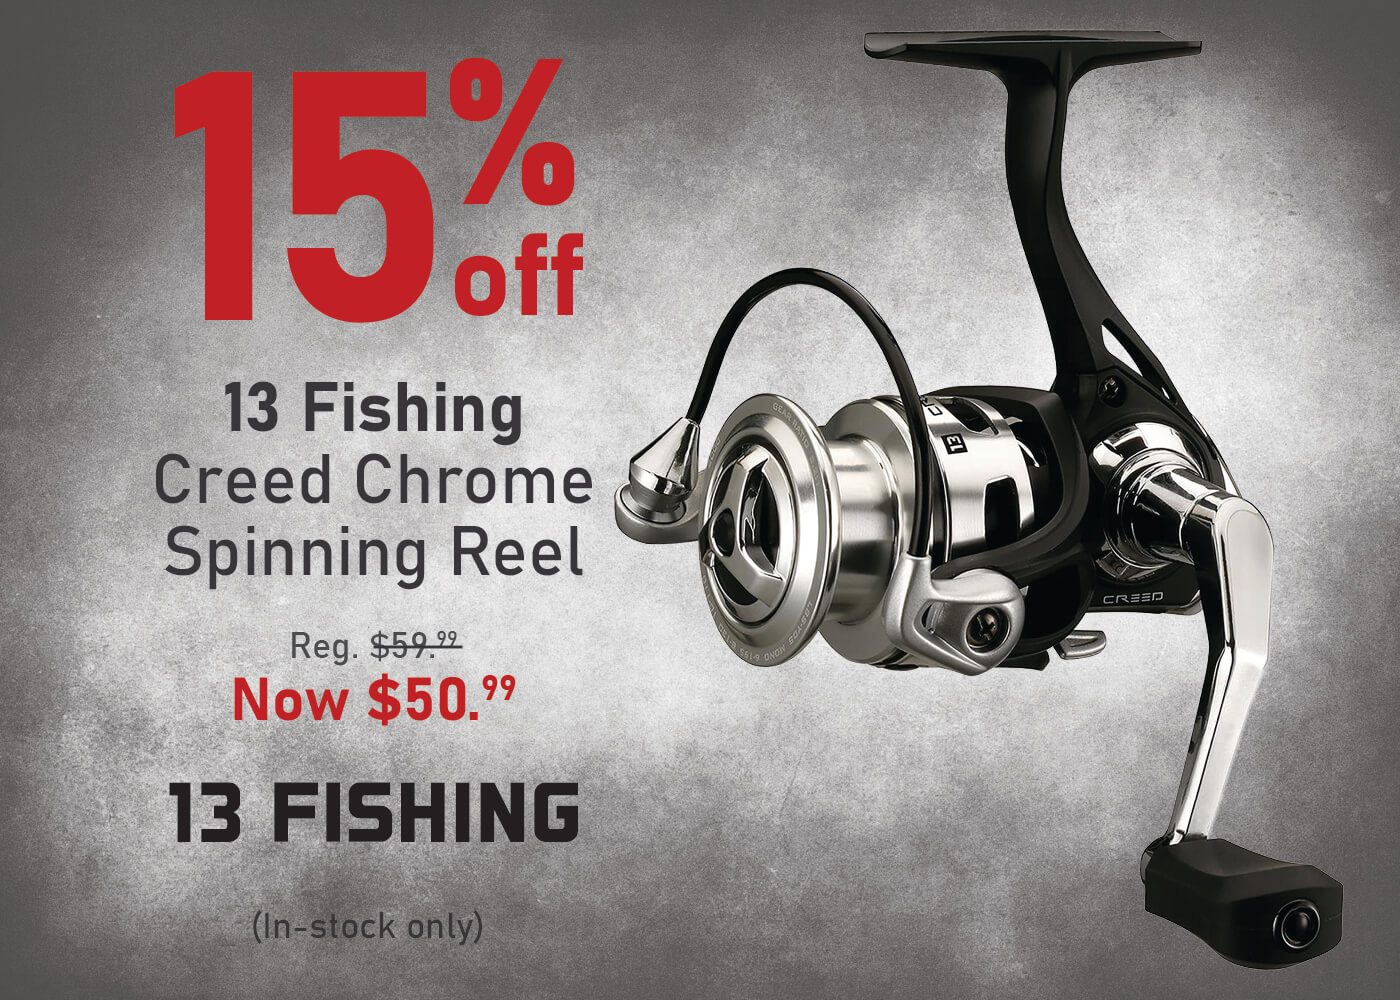 Take 15% off the 13 Fishing Creed Chrome Spinning Reel